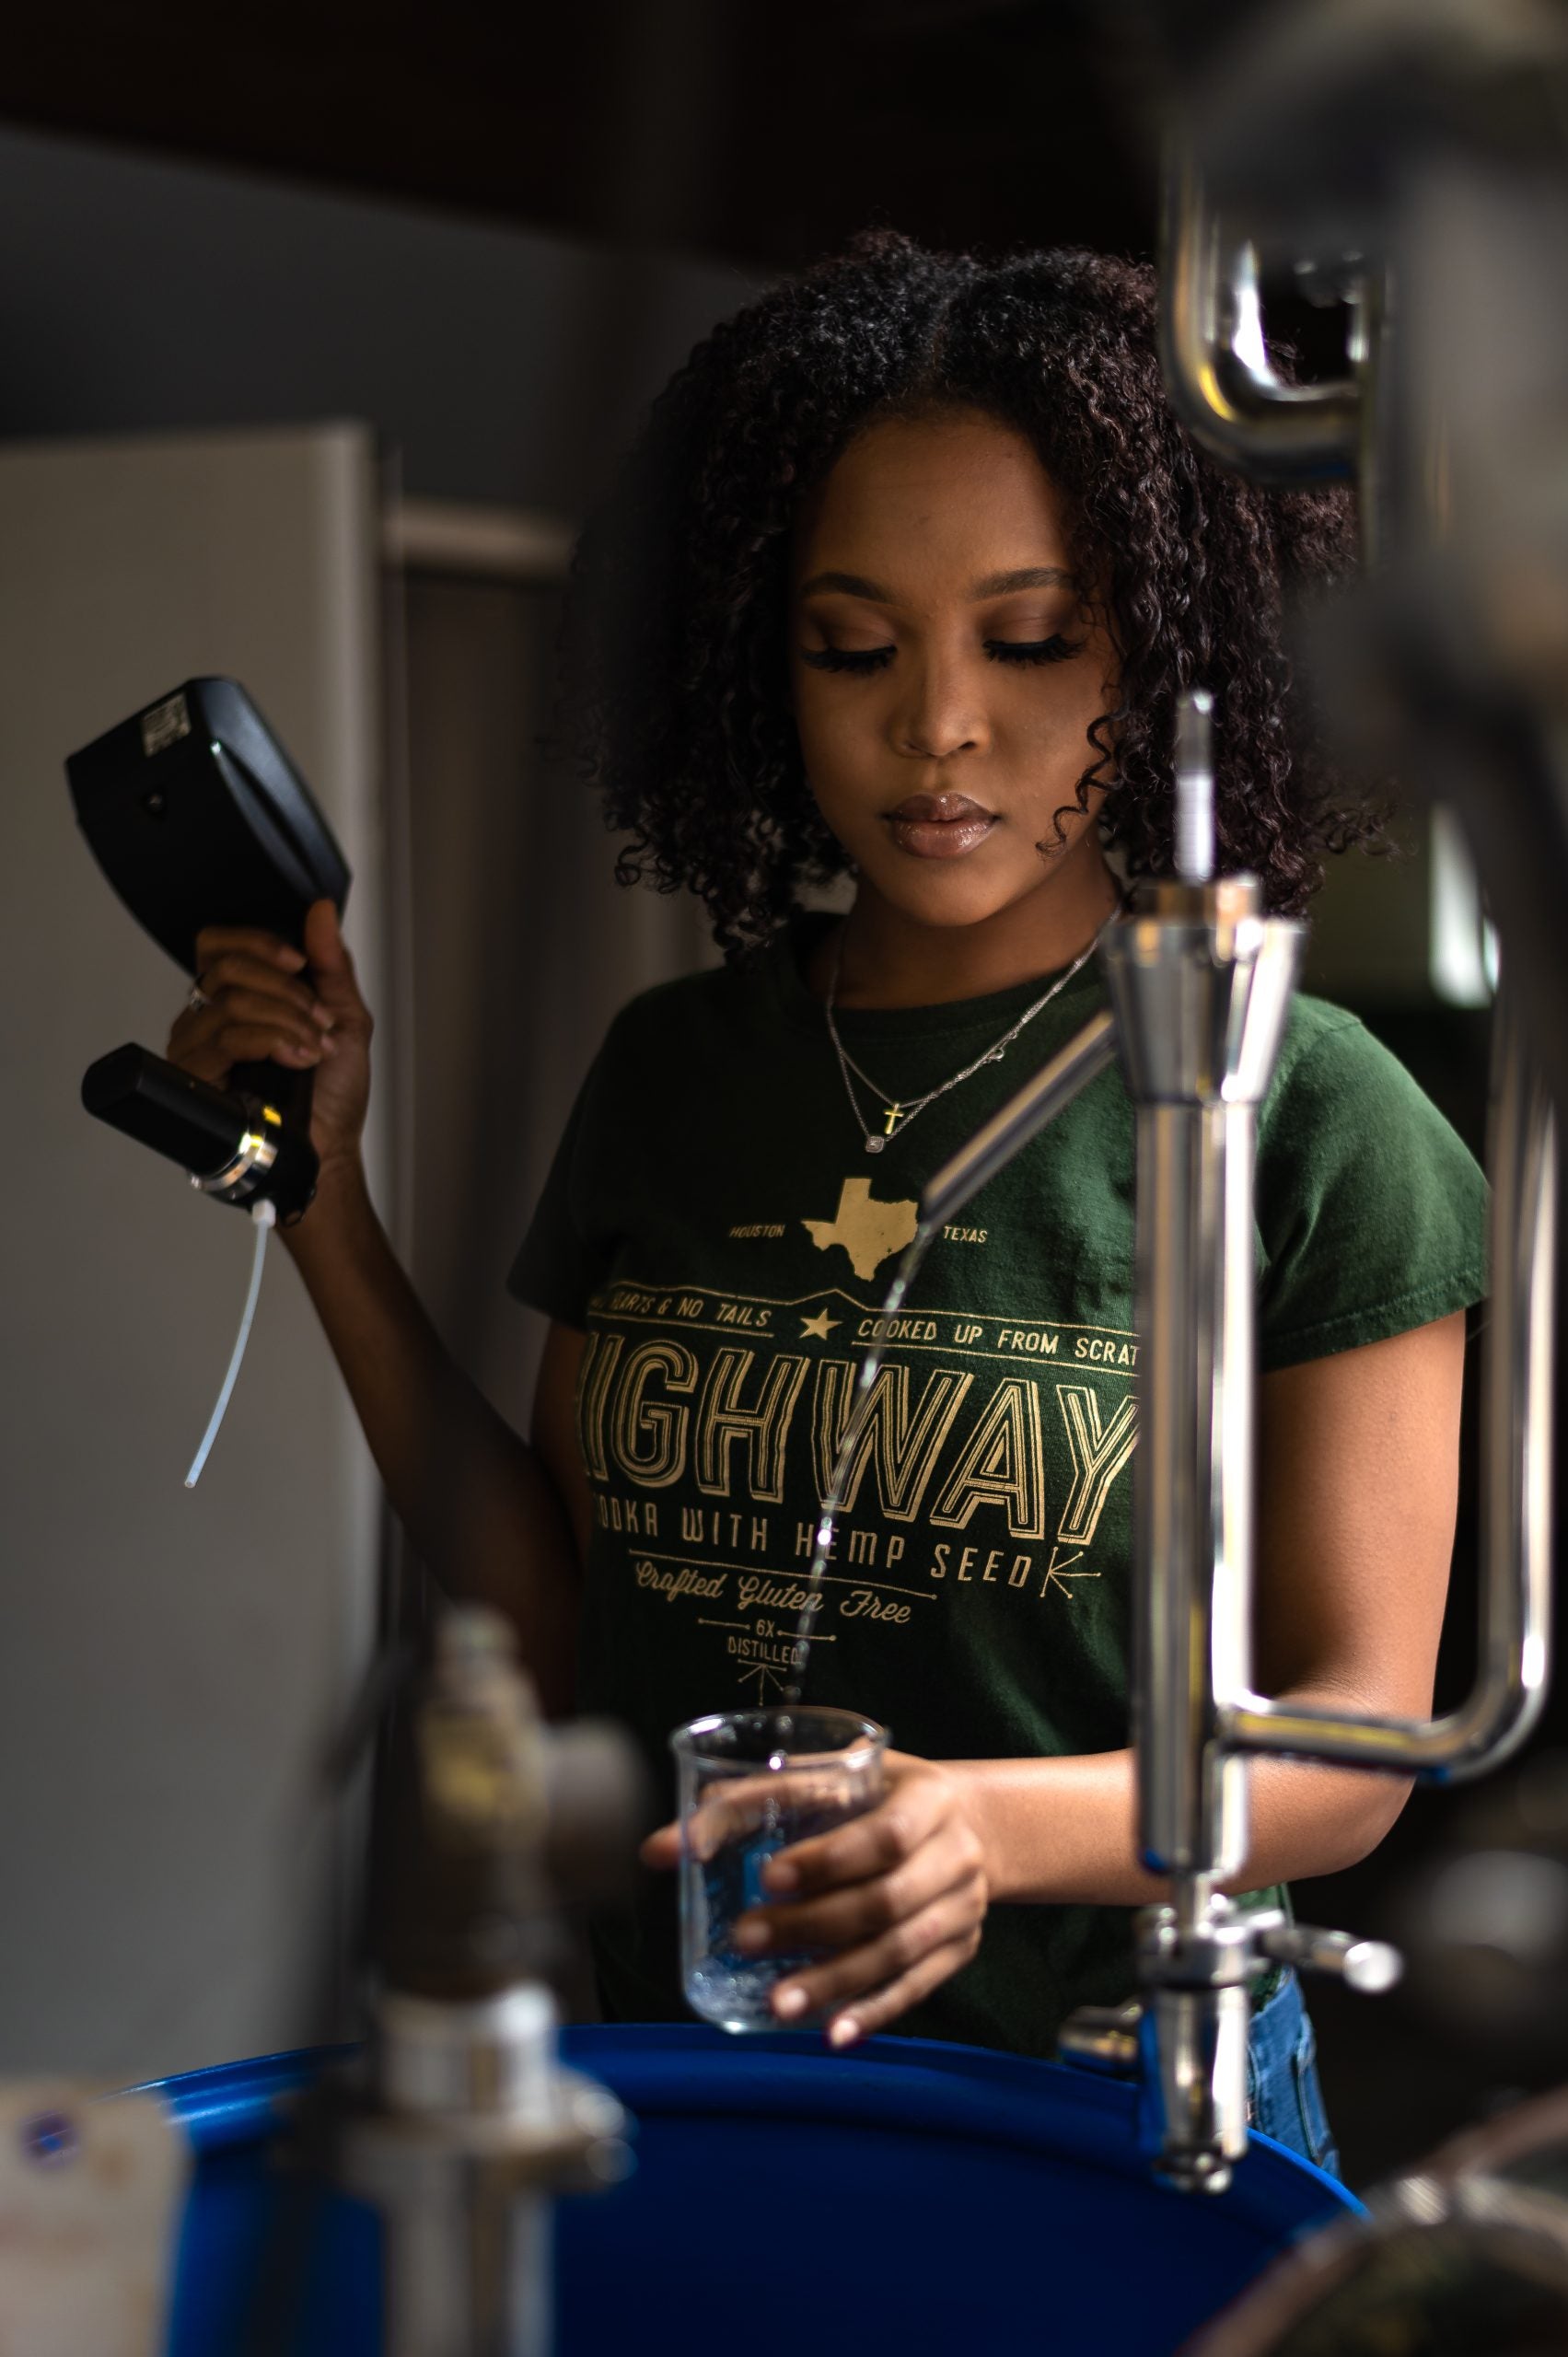 Let’s Toast: Codi Fuller, Youngest Black Woman Distiller In The U.S., Is Crafting A Hangover-Free Vodka